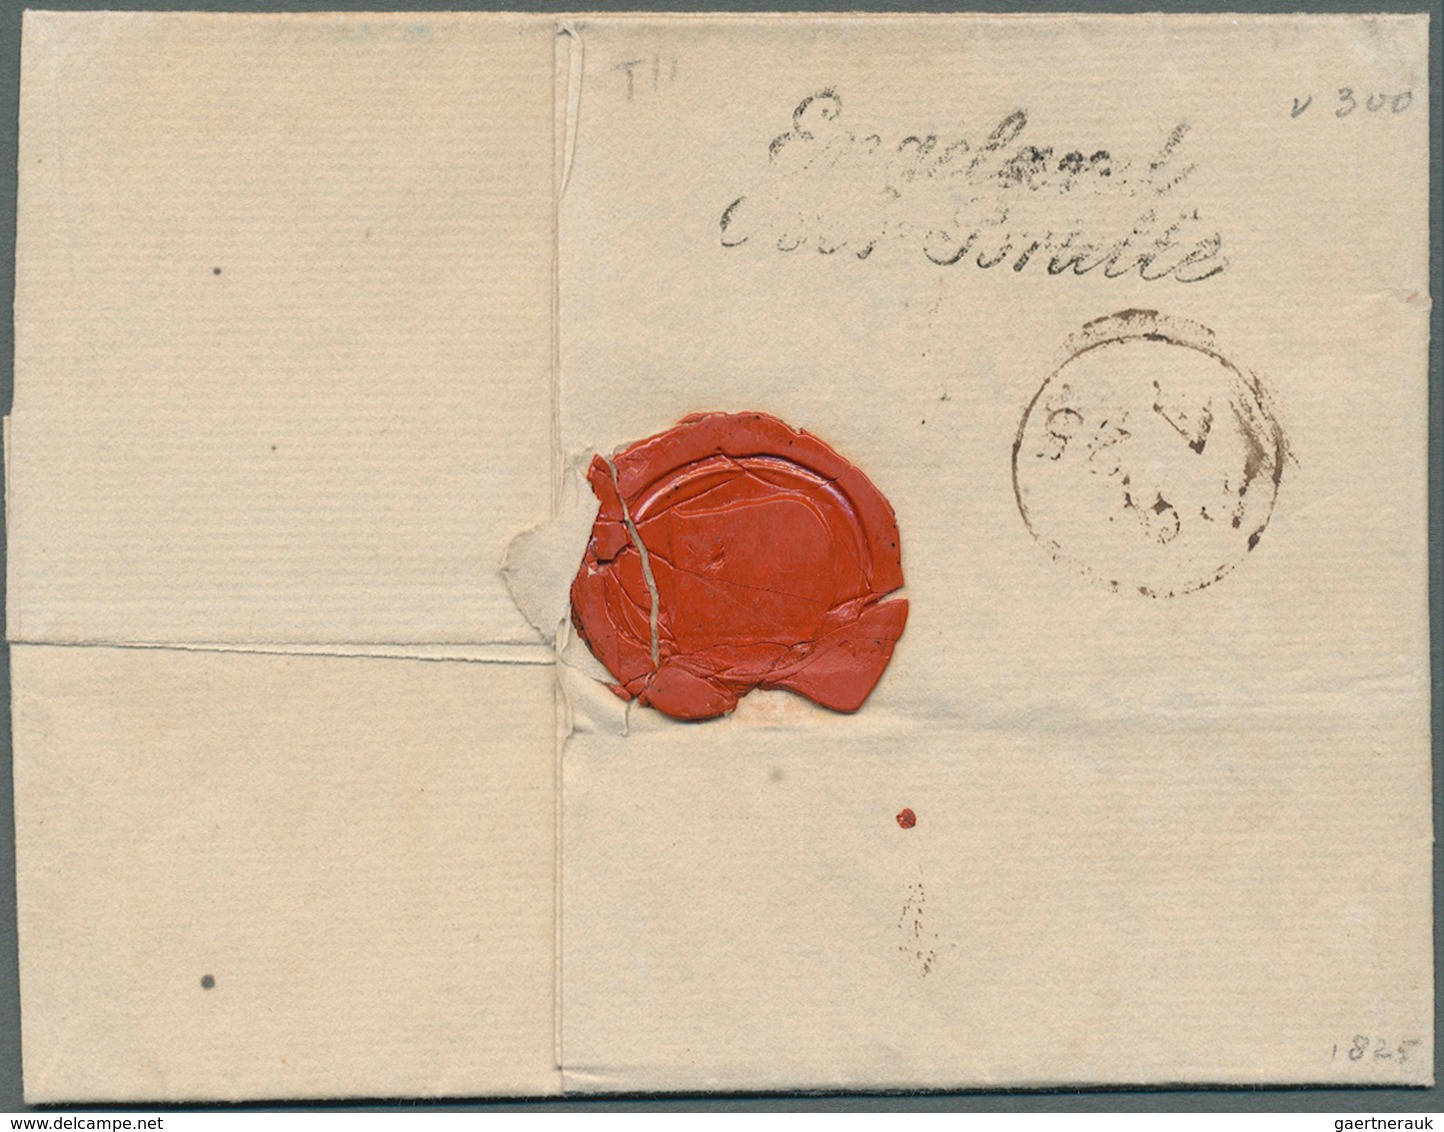 26639 Großbritannien - Vorphilatelie: 1791/1850 ca., 360 early covers with a great variety of cancellation